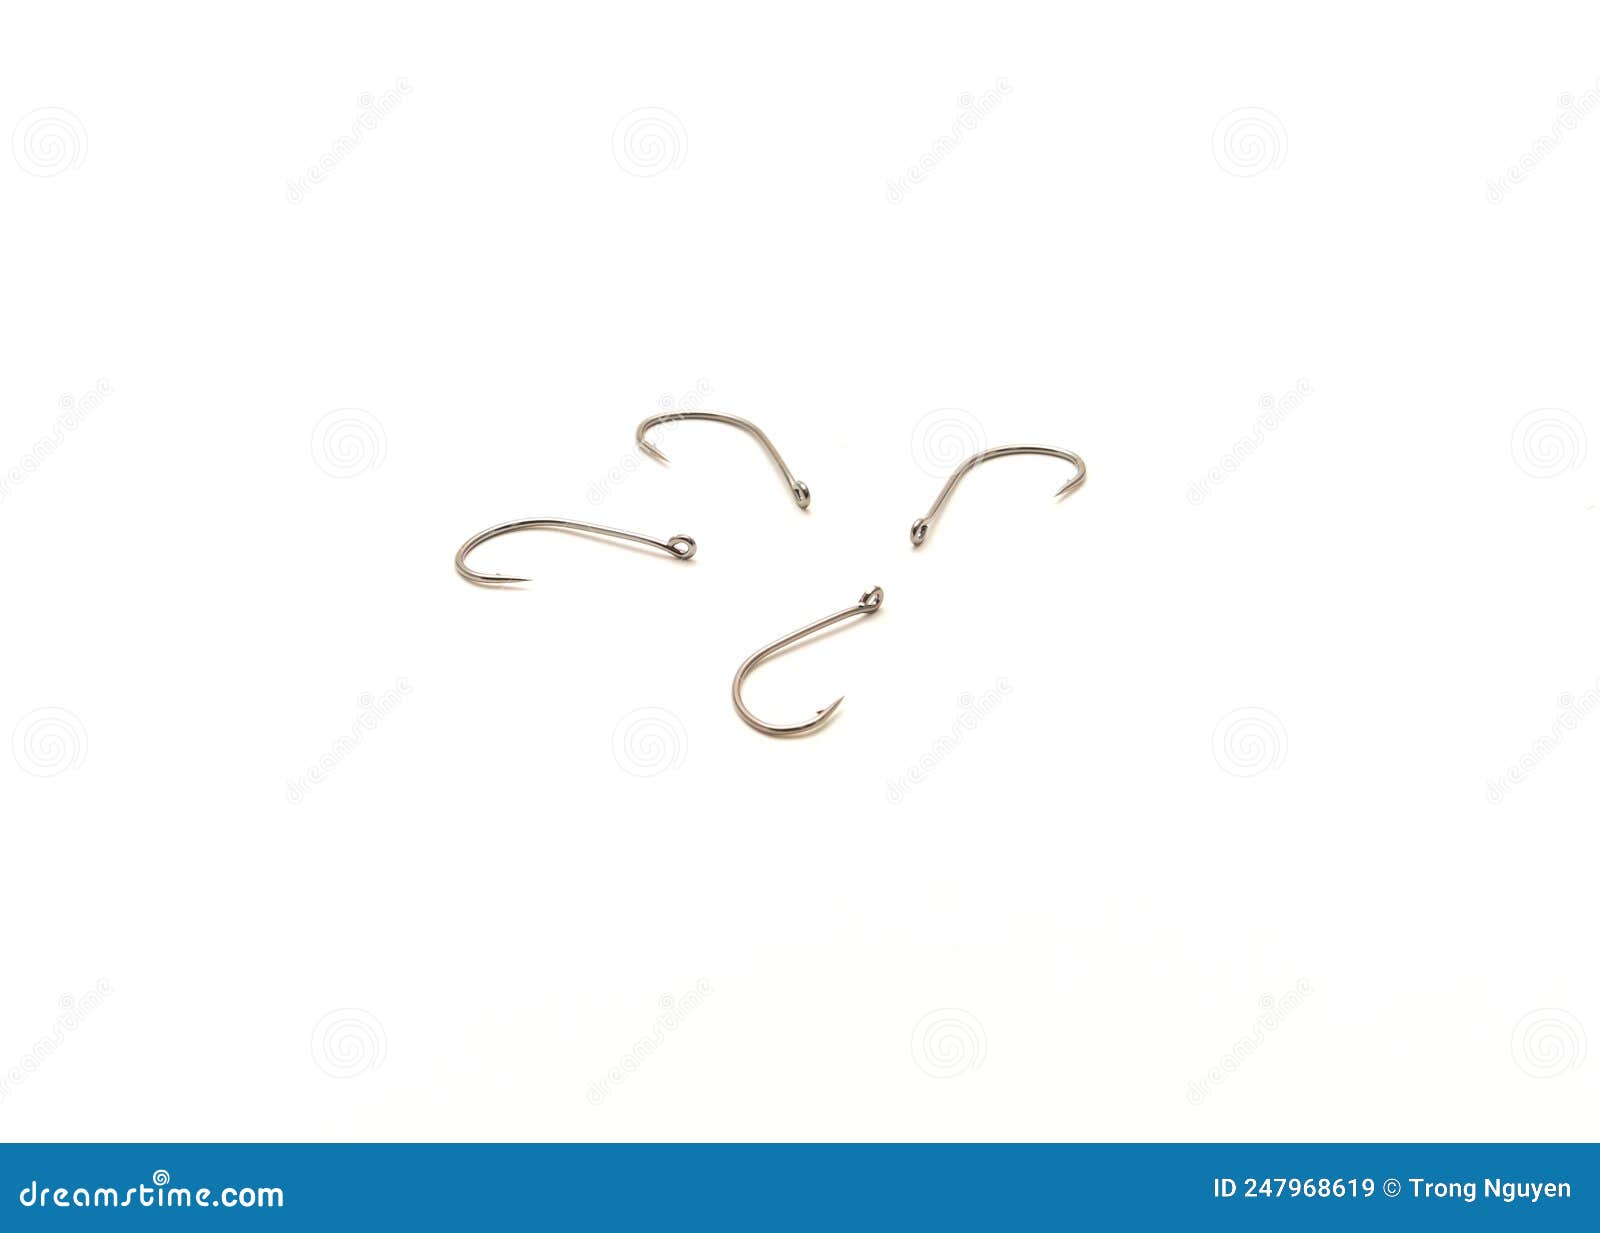 Four Drop Shot Fishing Hooks Size 2 Made from High Carbon Steel Isolated on  White Background Stock Image - Image of shiny, sharp: 247968619